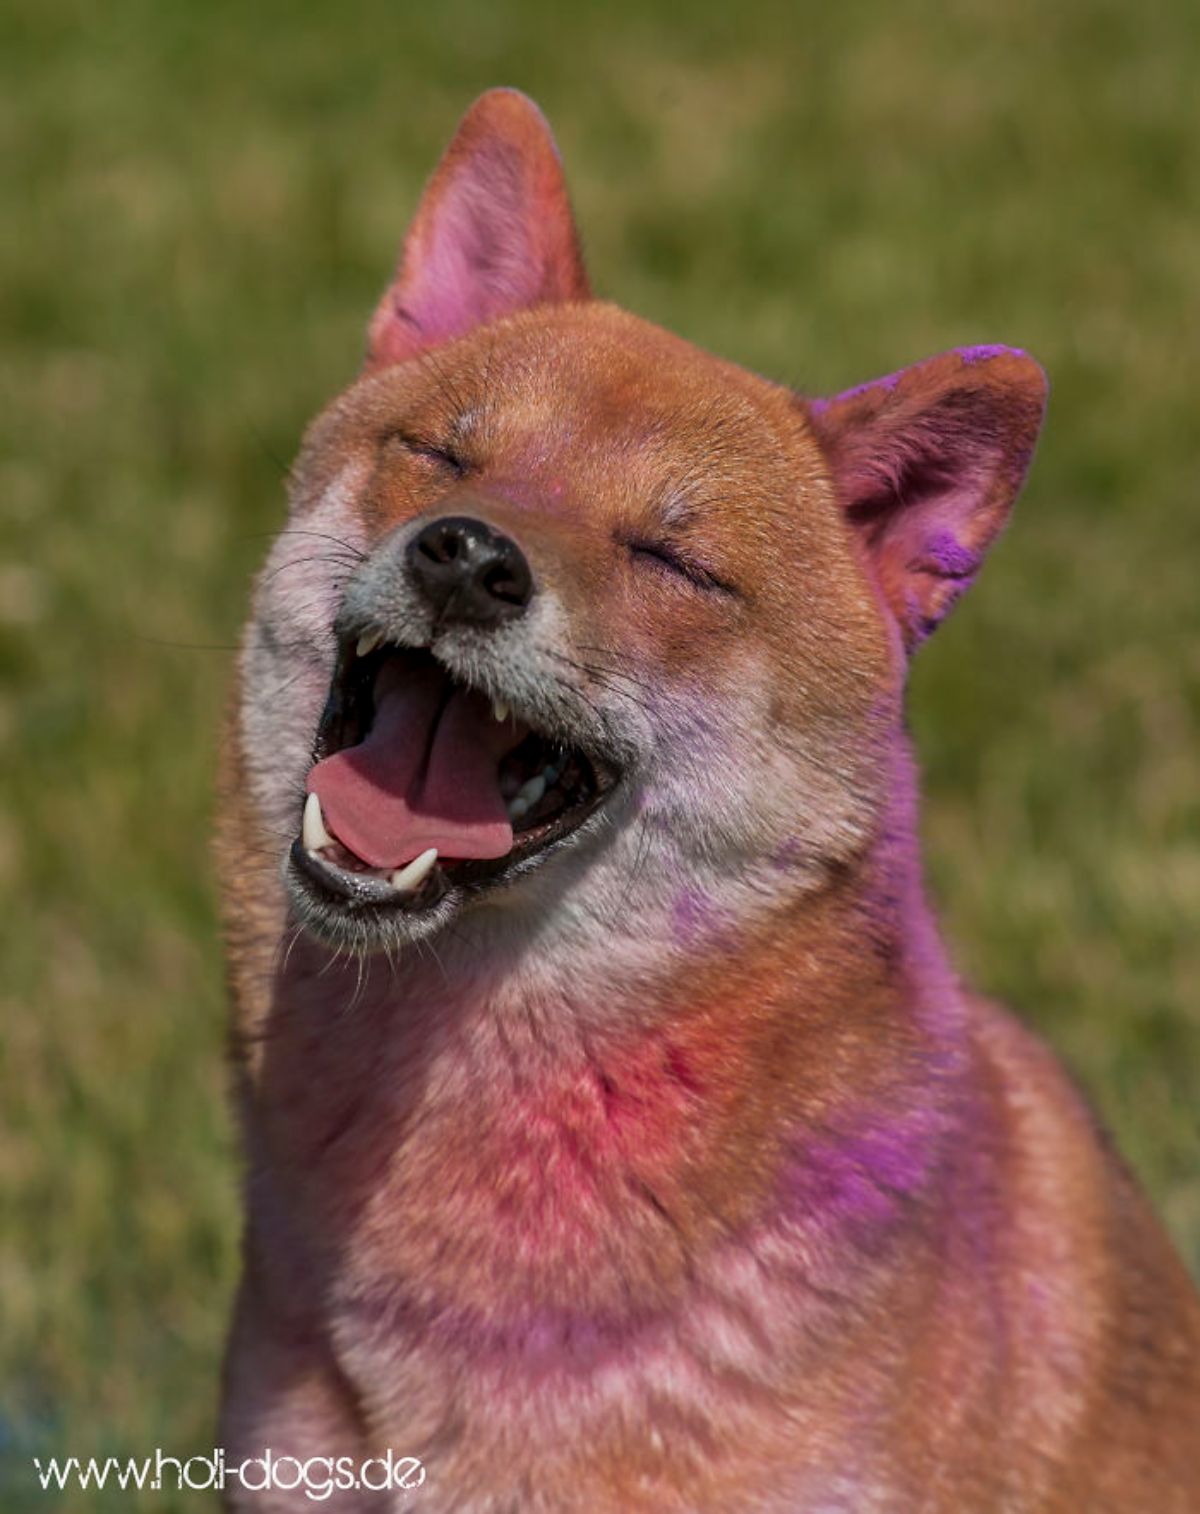 brown and white dog covered in pink chalk and having the mouth open and eyes closed